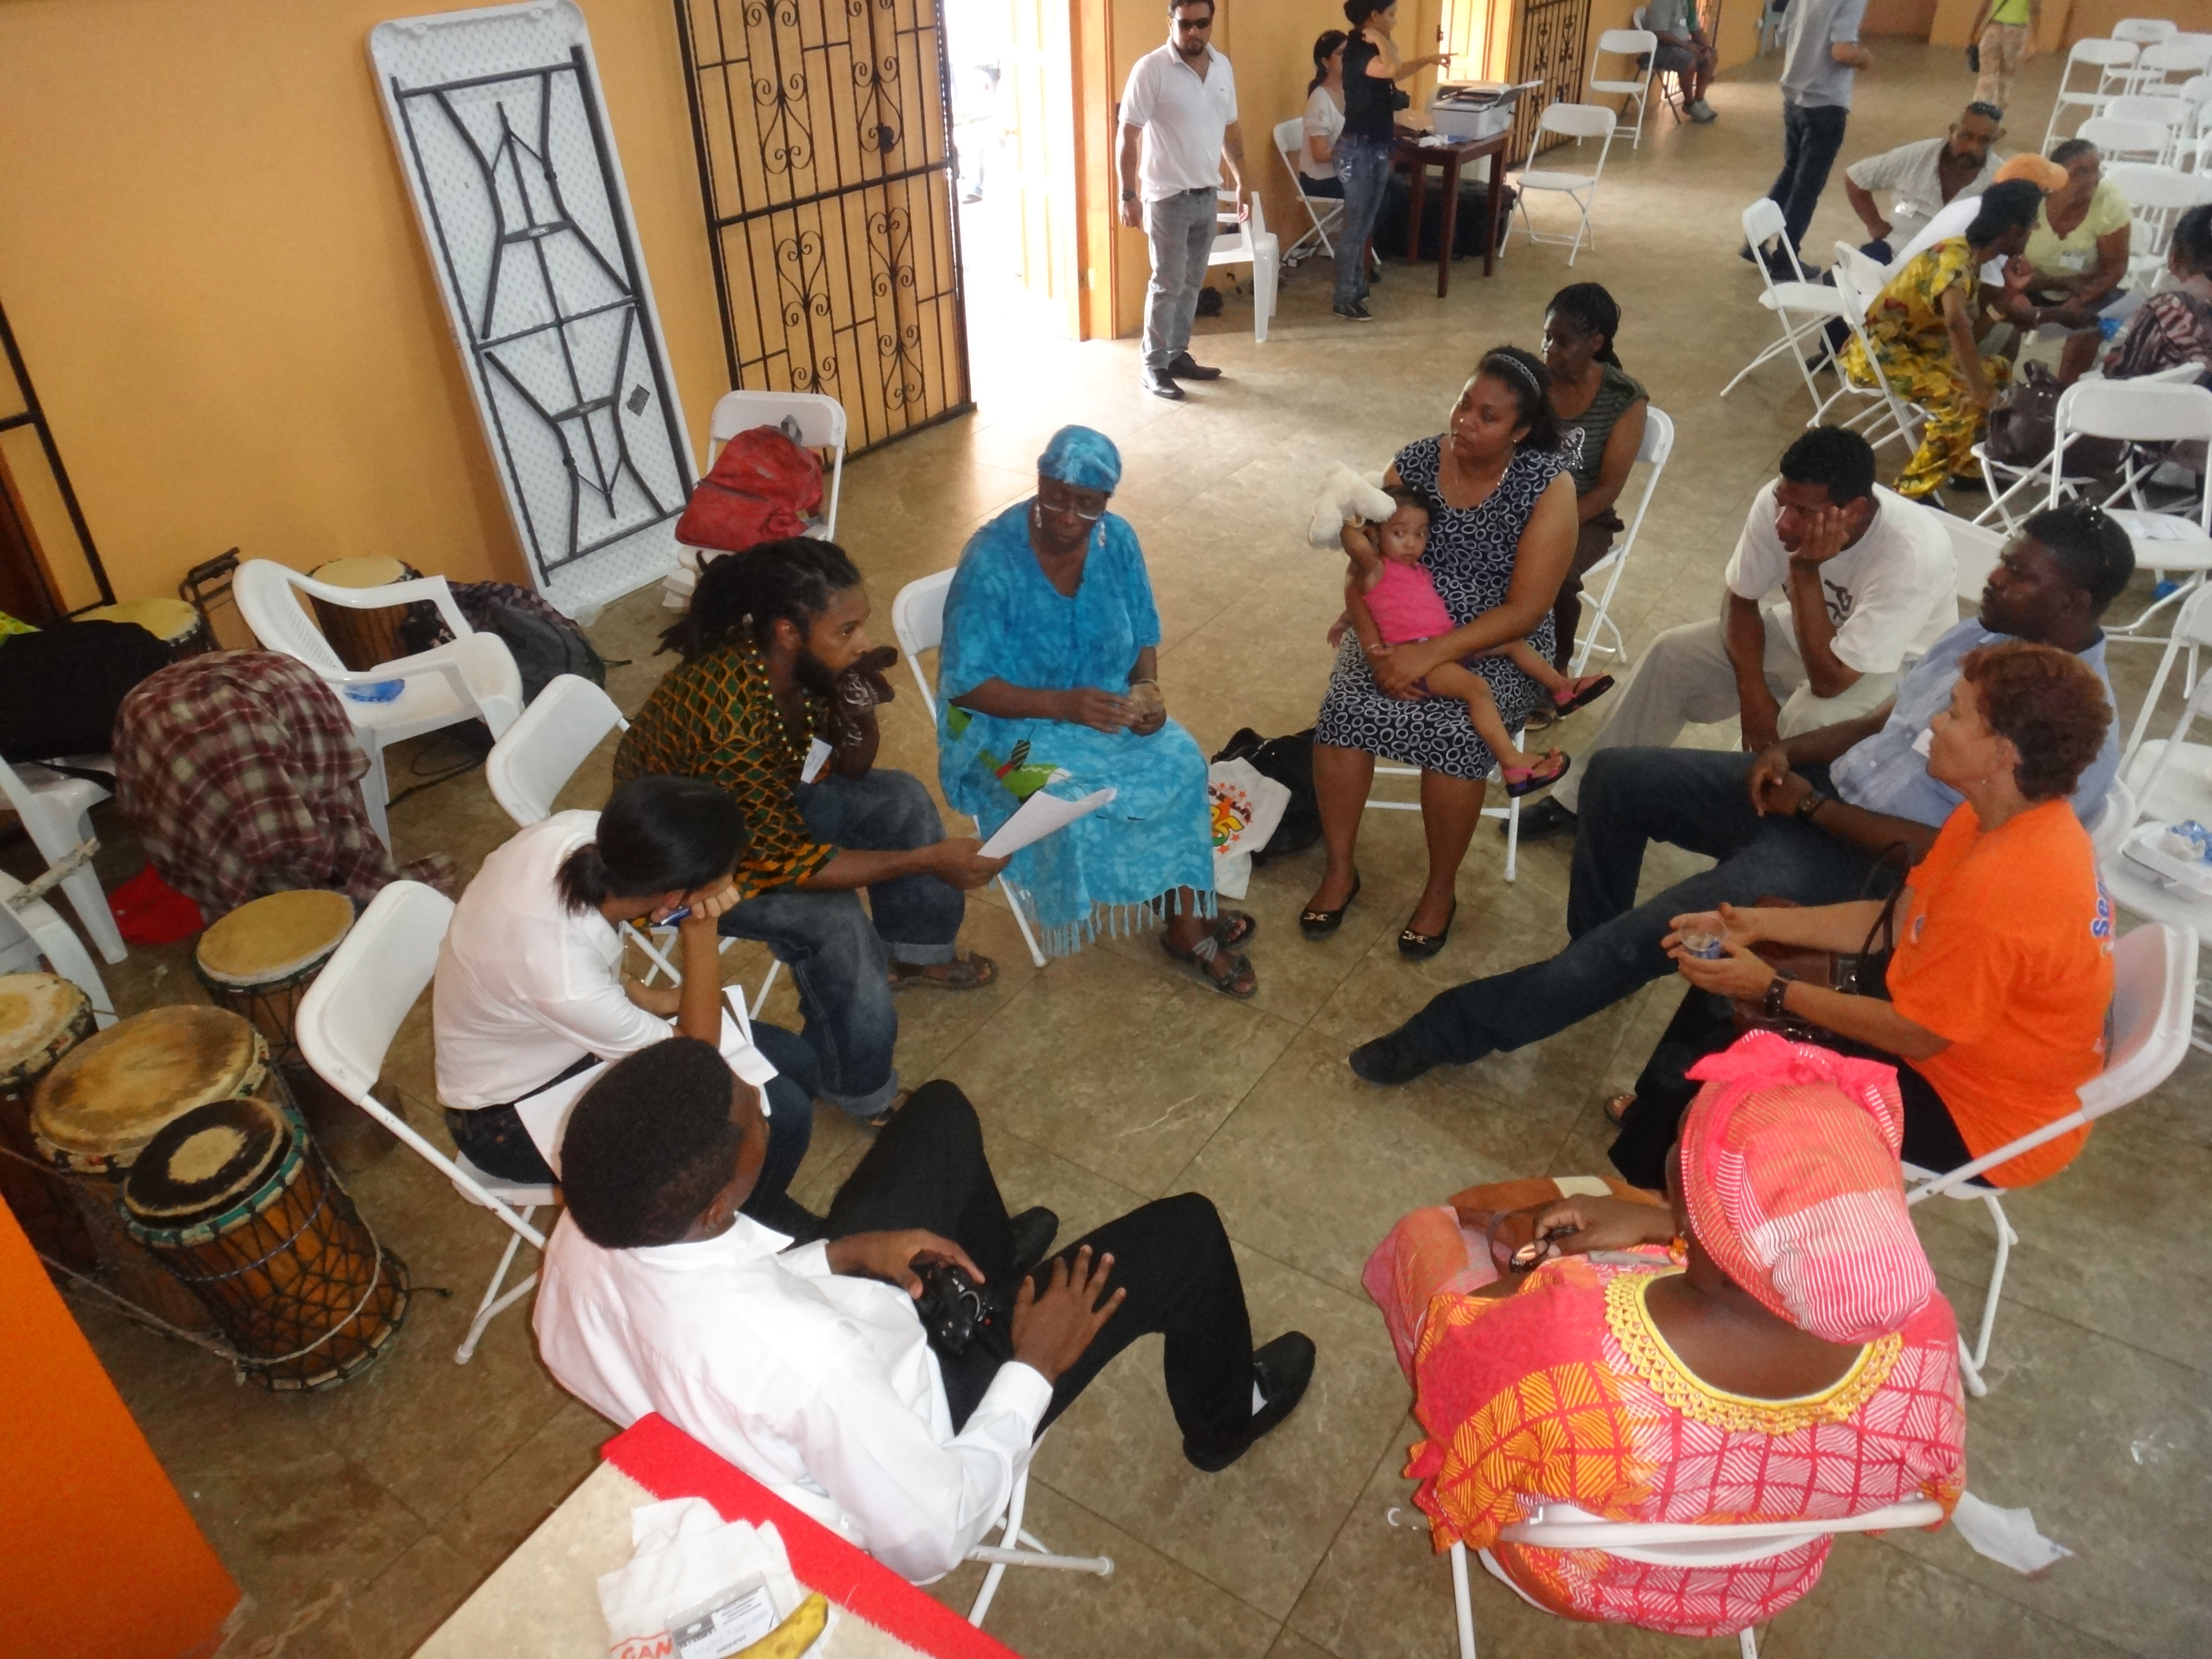 The Garifuna people, an Afro-Indigenous nation descendant of the Arawaks, gather to discuss the challenges facing their people across borders.